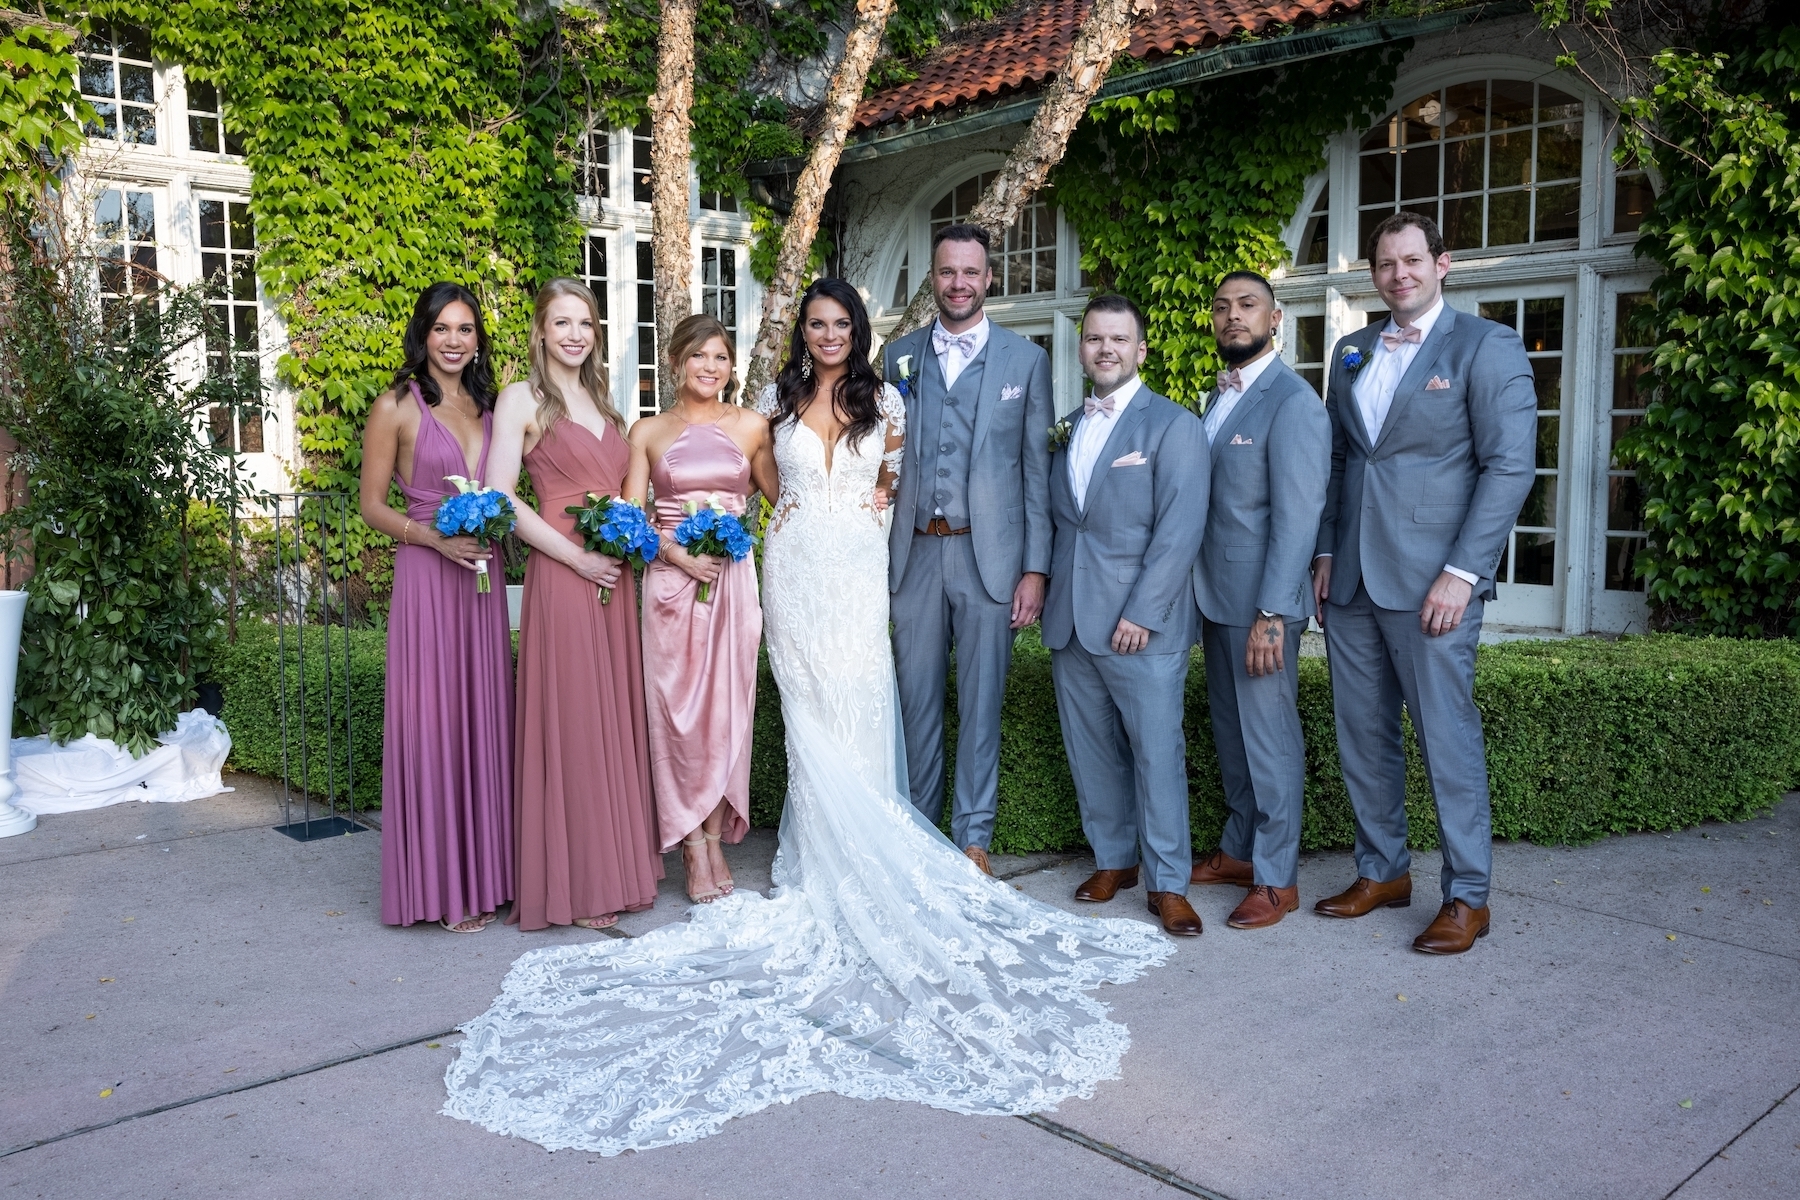 Danielle and Nick and their bridal party